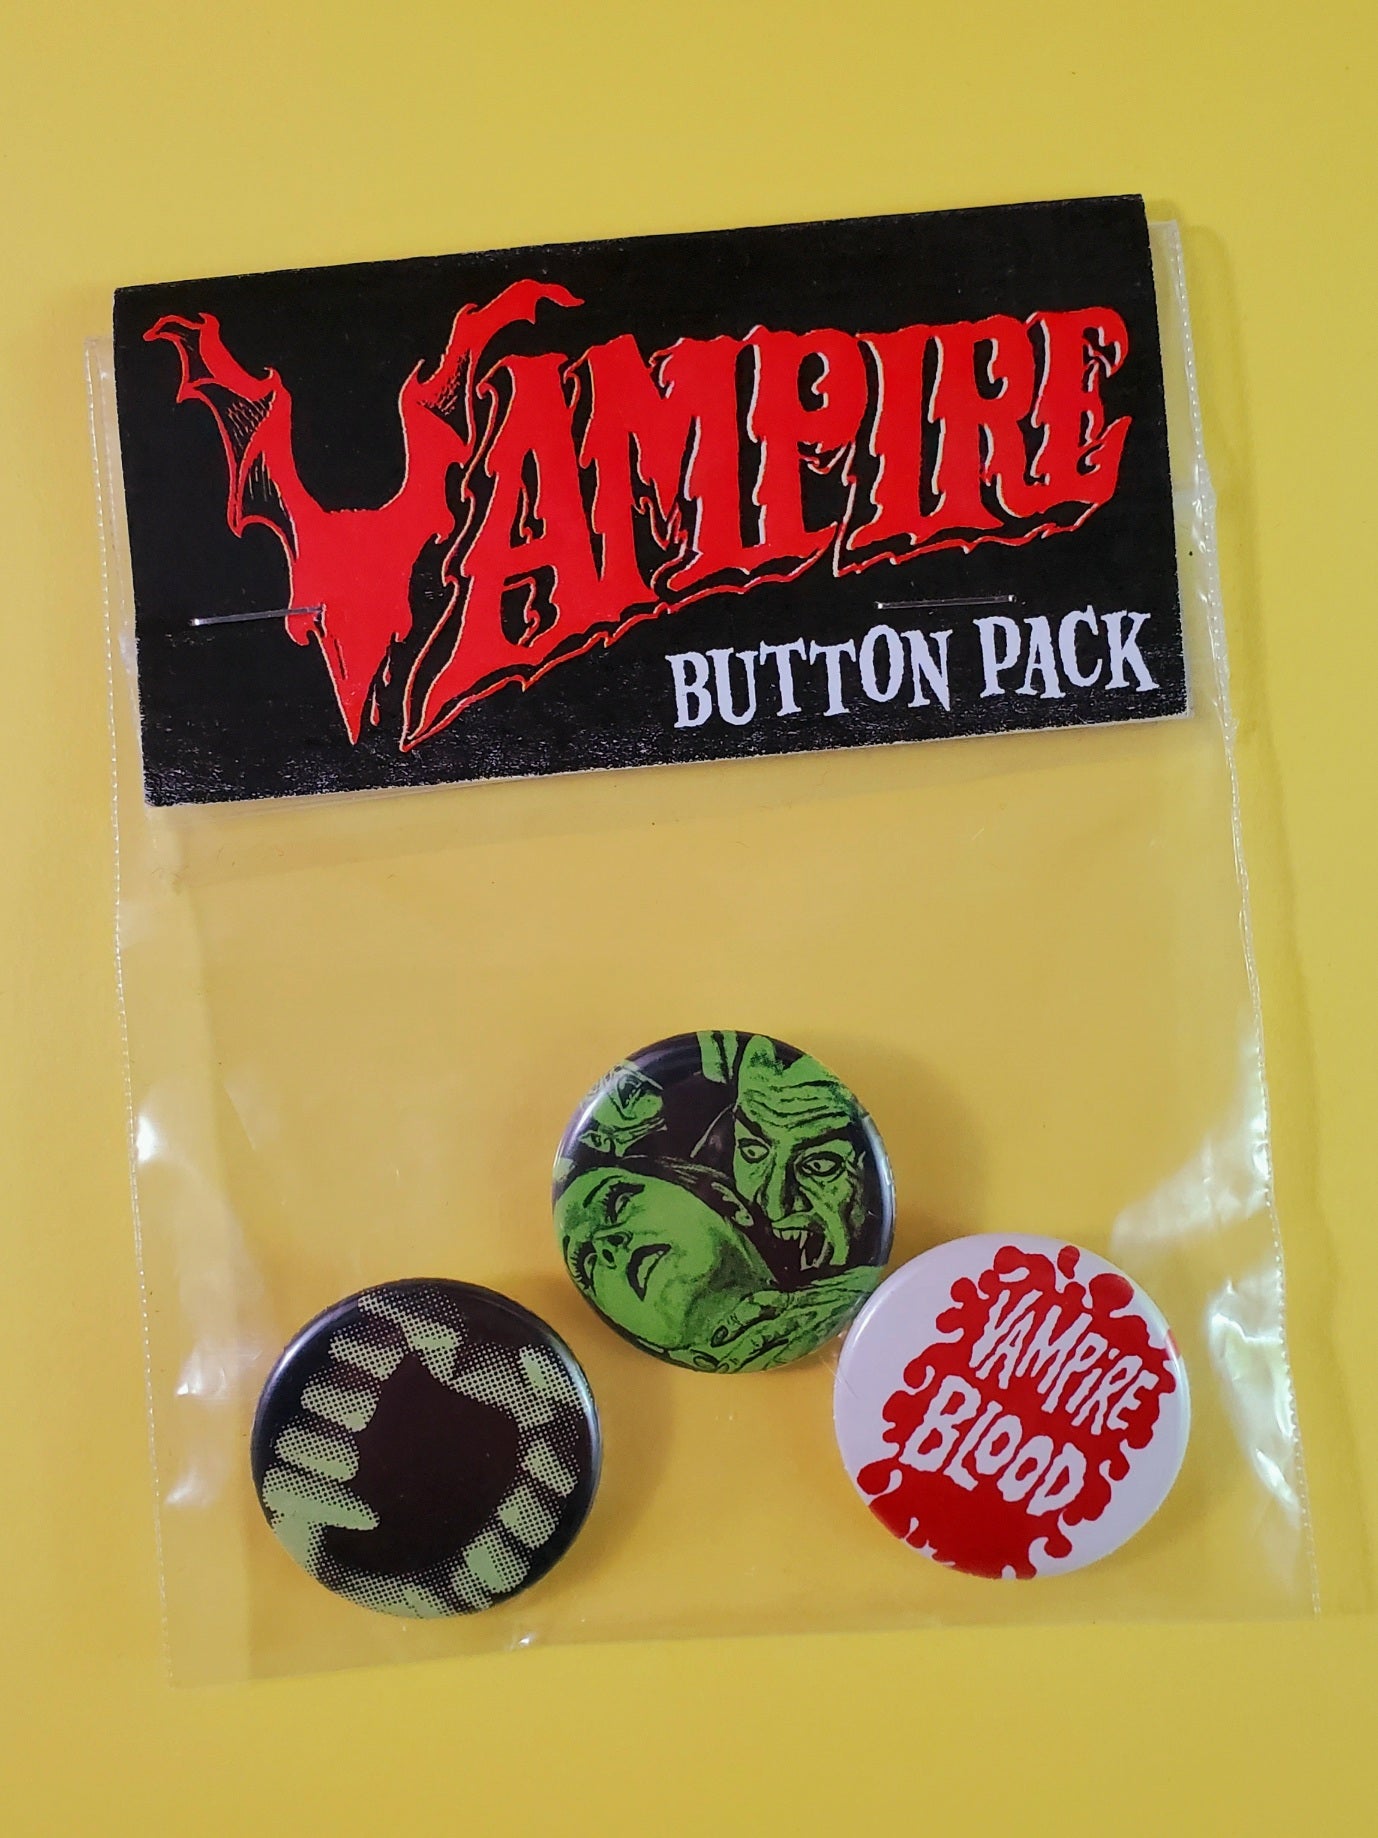 Set of three bloodsucker themed 1.25" pinback buttons, shown in plastic bag packaging with "Vampire Button Pack" illustrated header